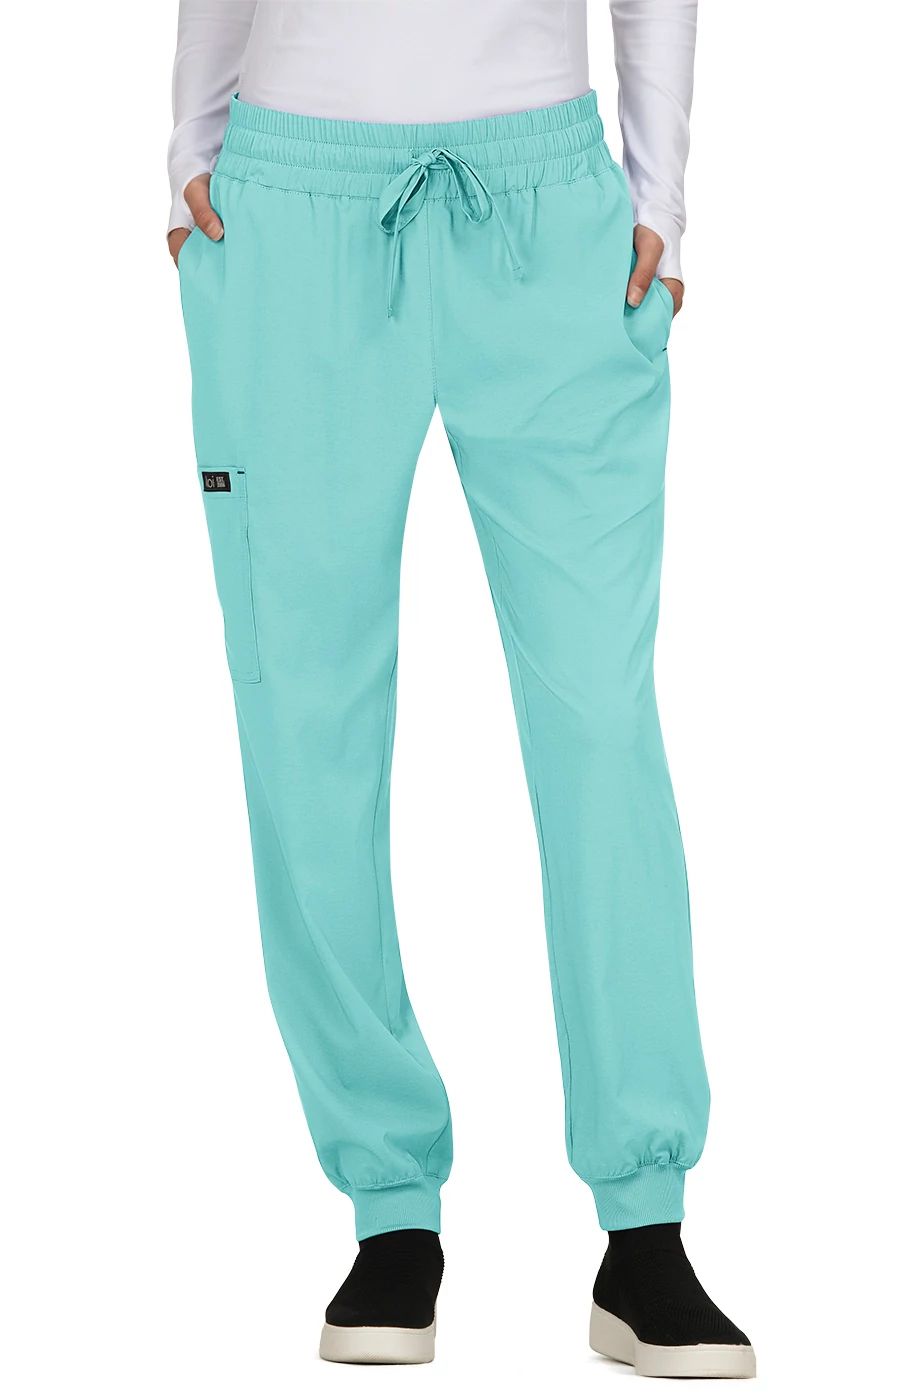 Corra Cotton Spandex Jogger Pants with Side Pockets – Robi & Peach